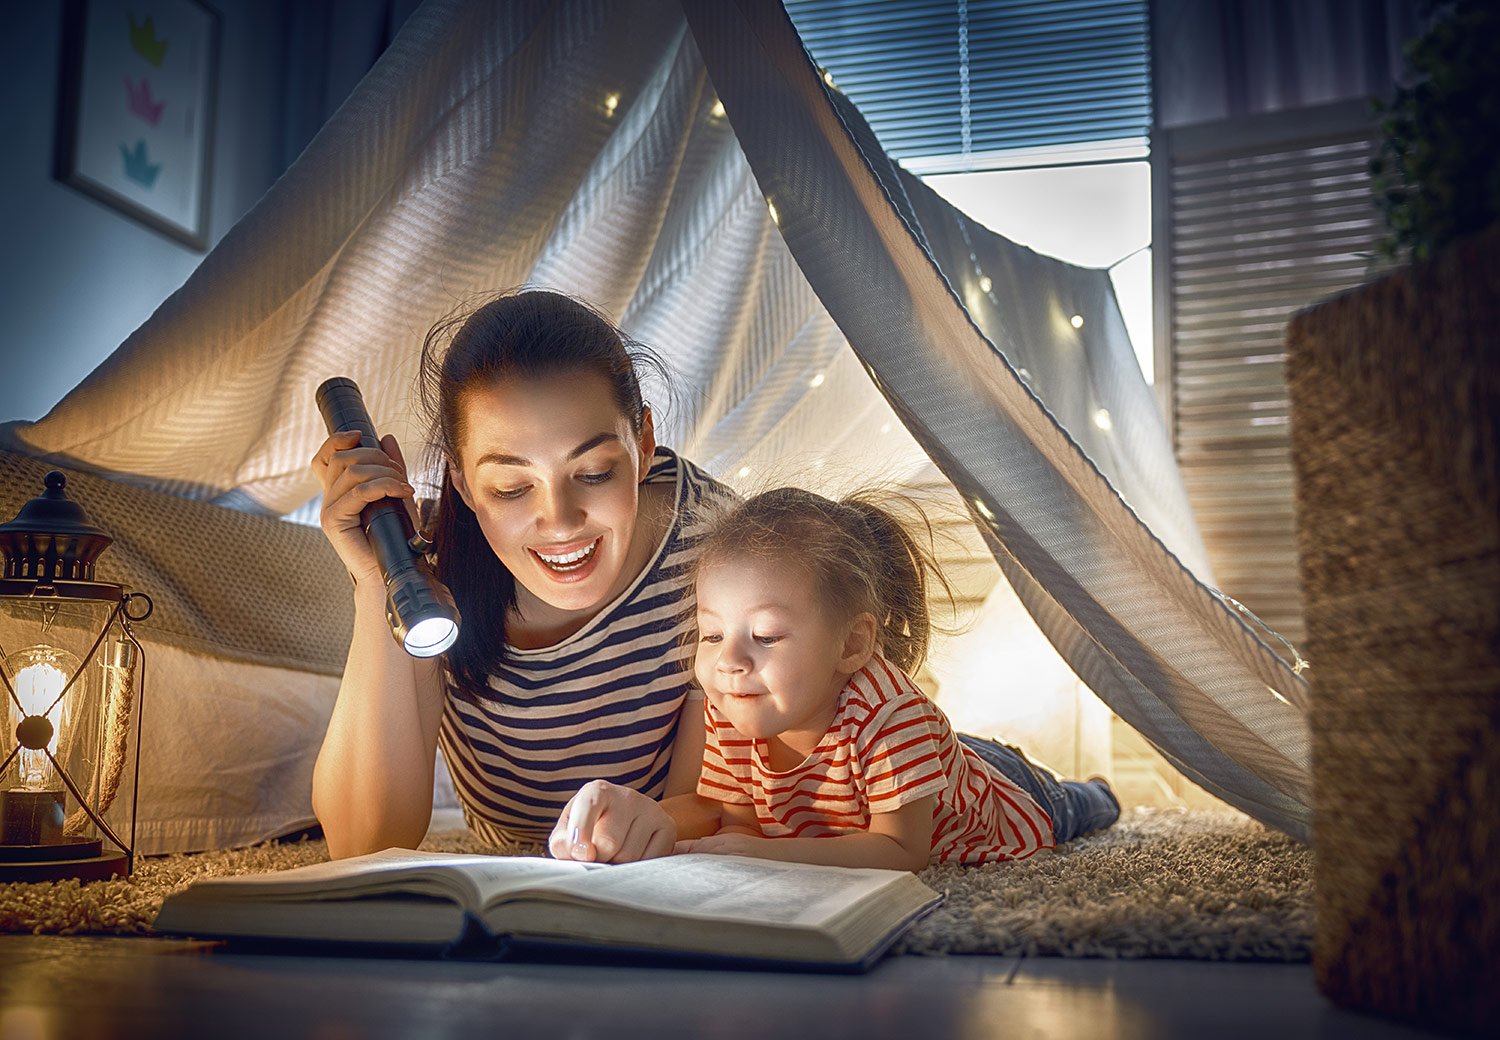 Improving literacy means a book, or iPad, at bedtime, say researchers